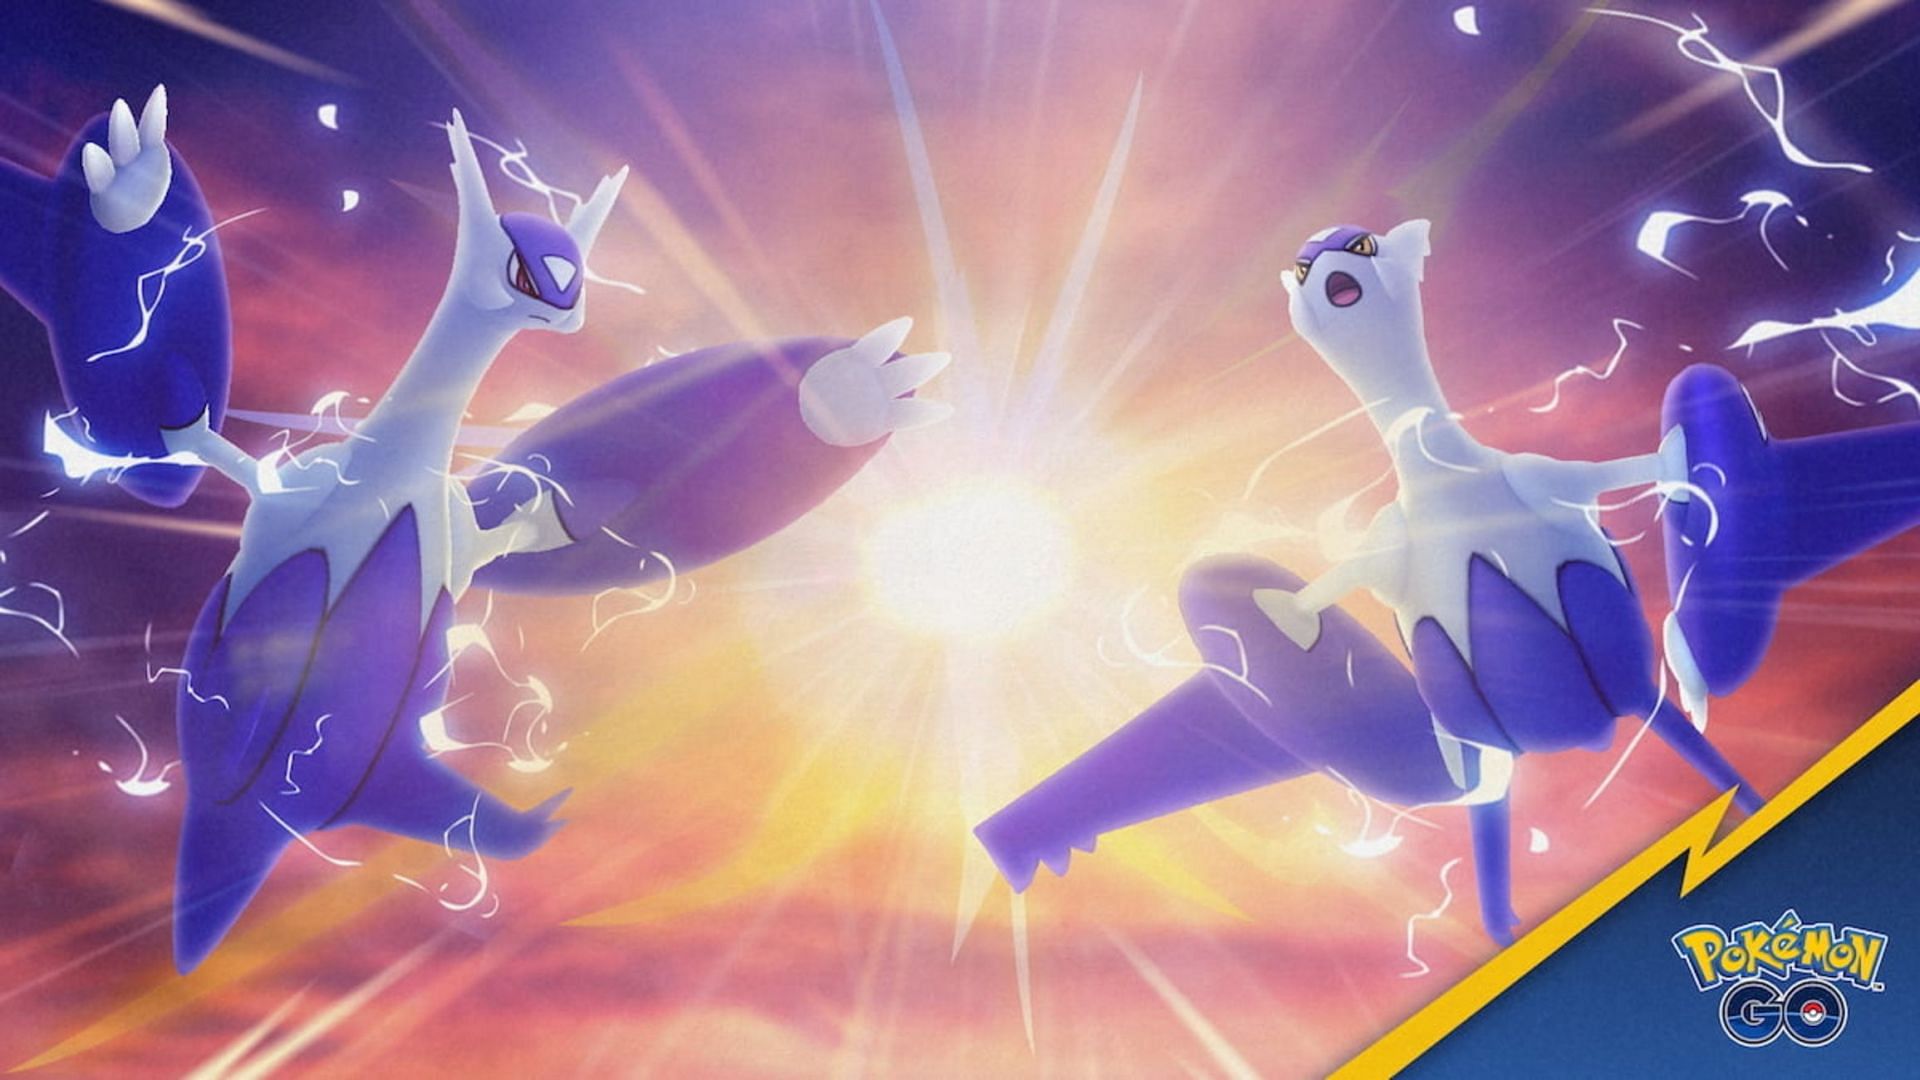 6-star raids are here, and trainers will need to pull out all the stops to beat them (Image via Niantic)